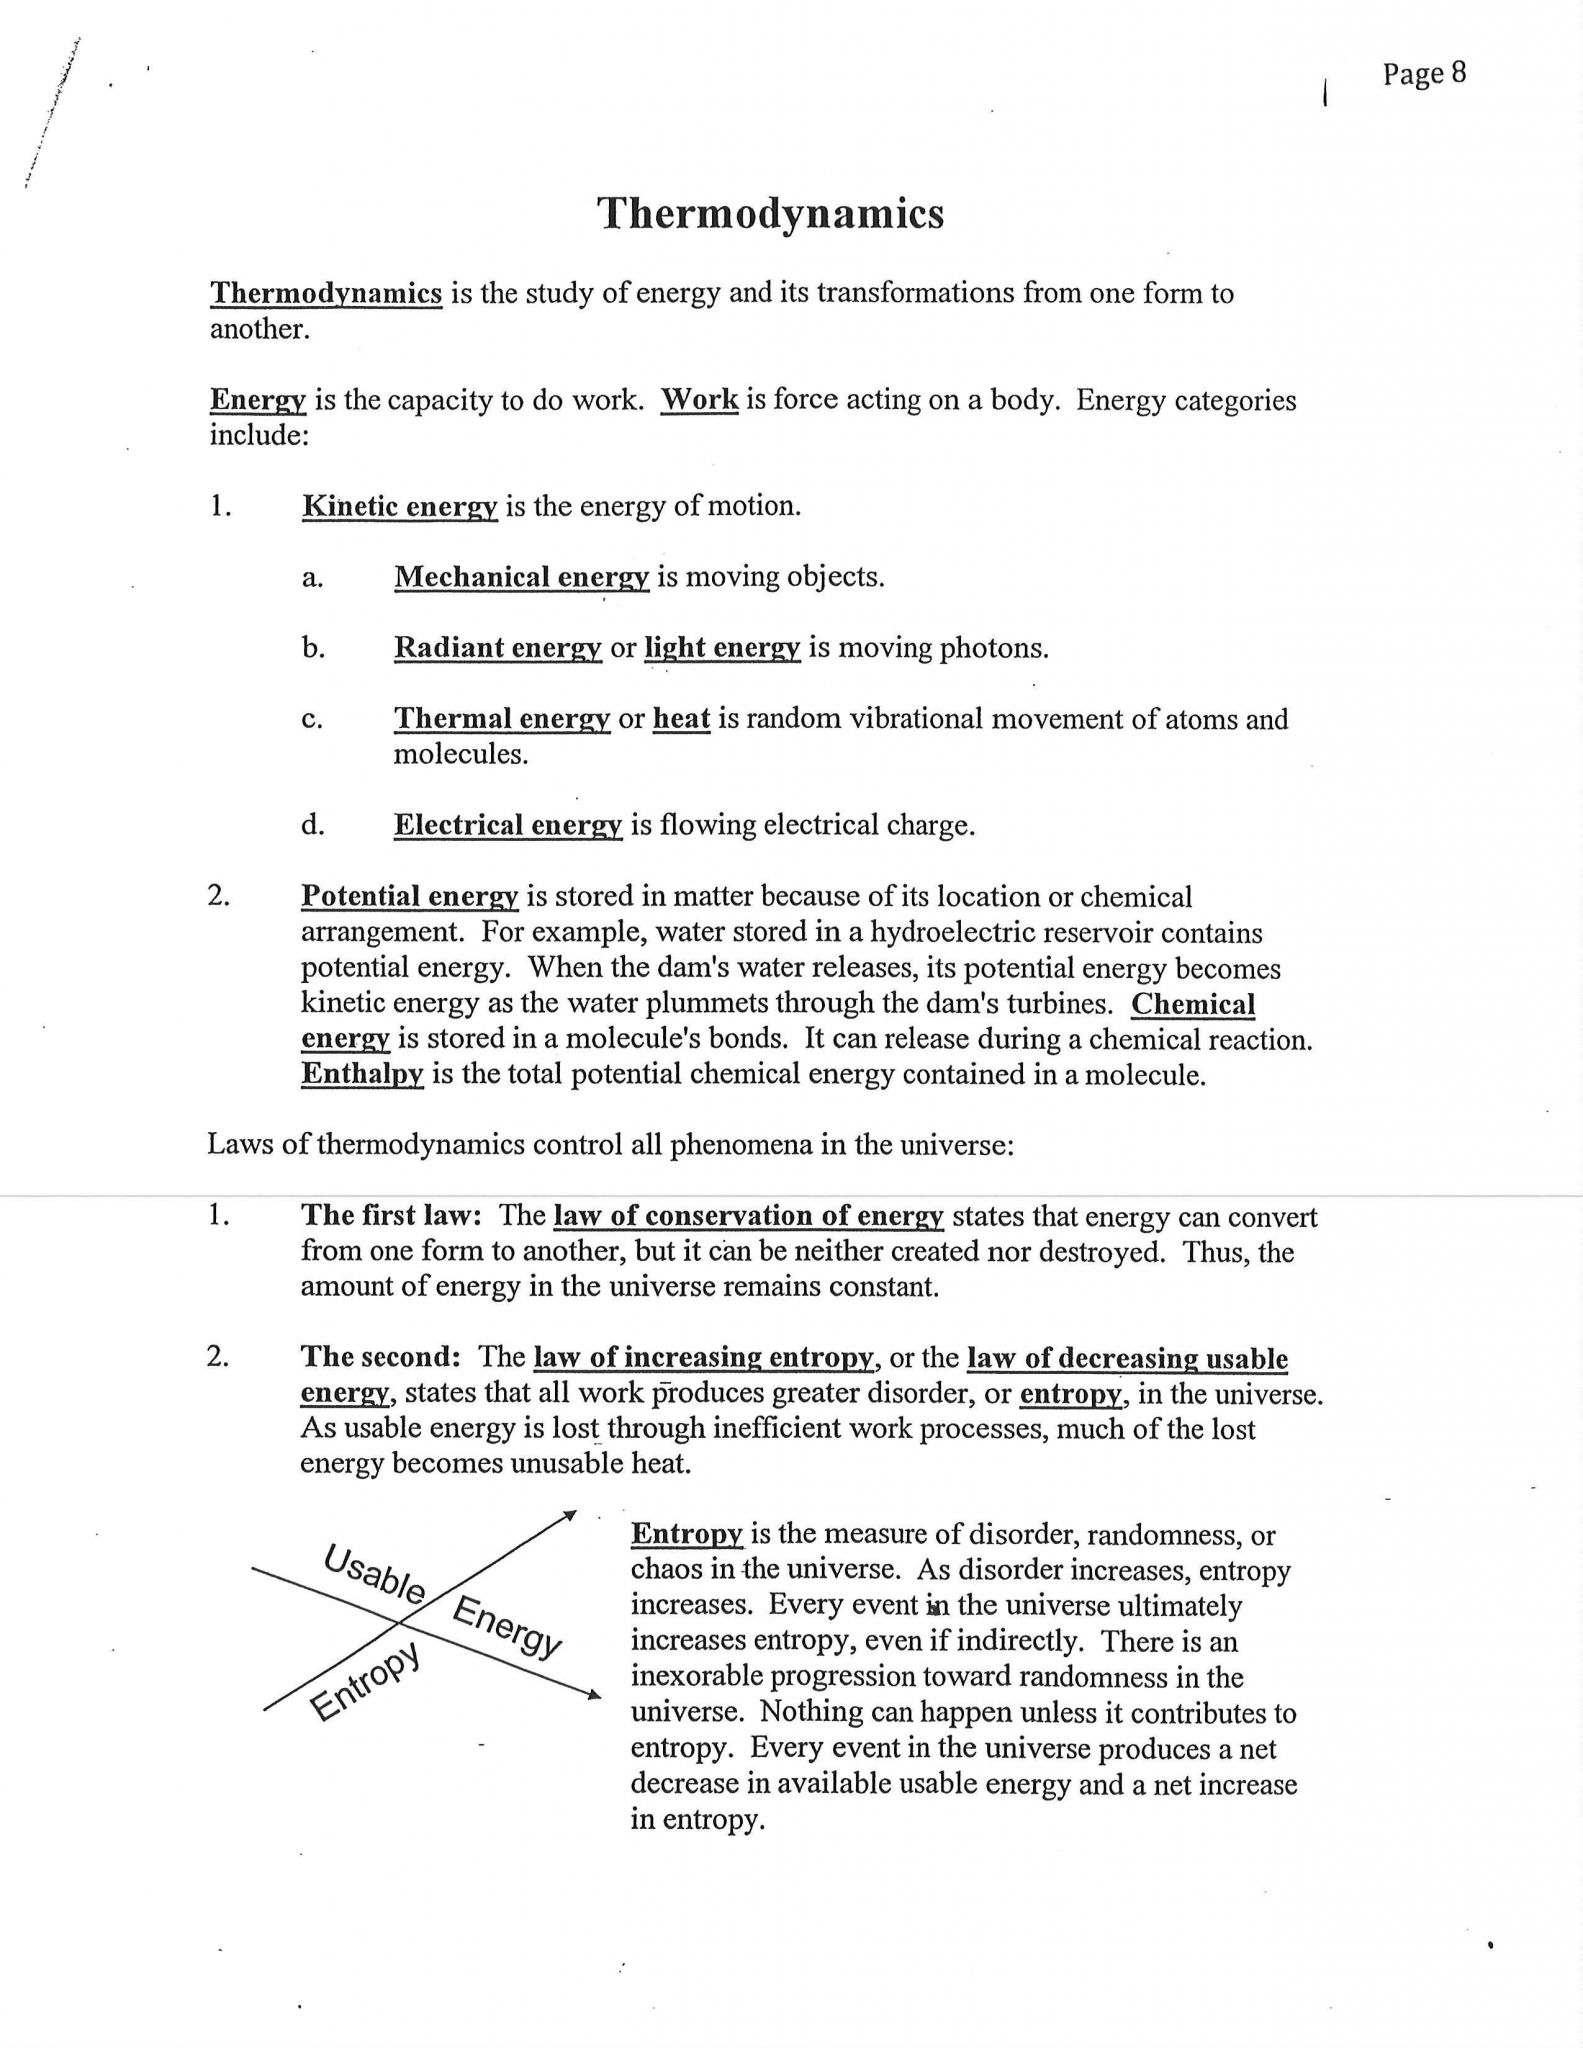 Potential Energy Problems Worksheet Along with Free Worksheets Library Download and Print Worksheets